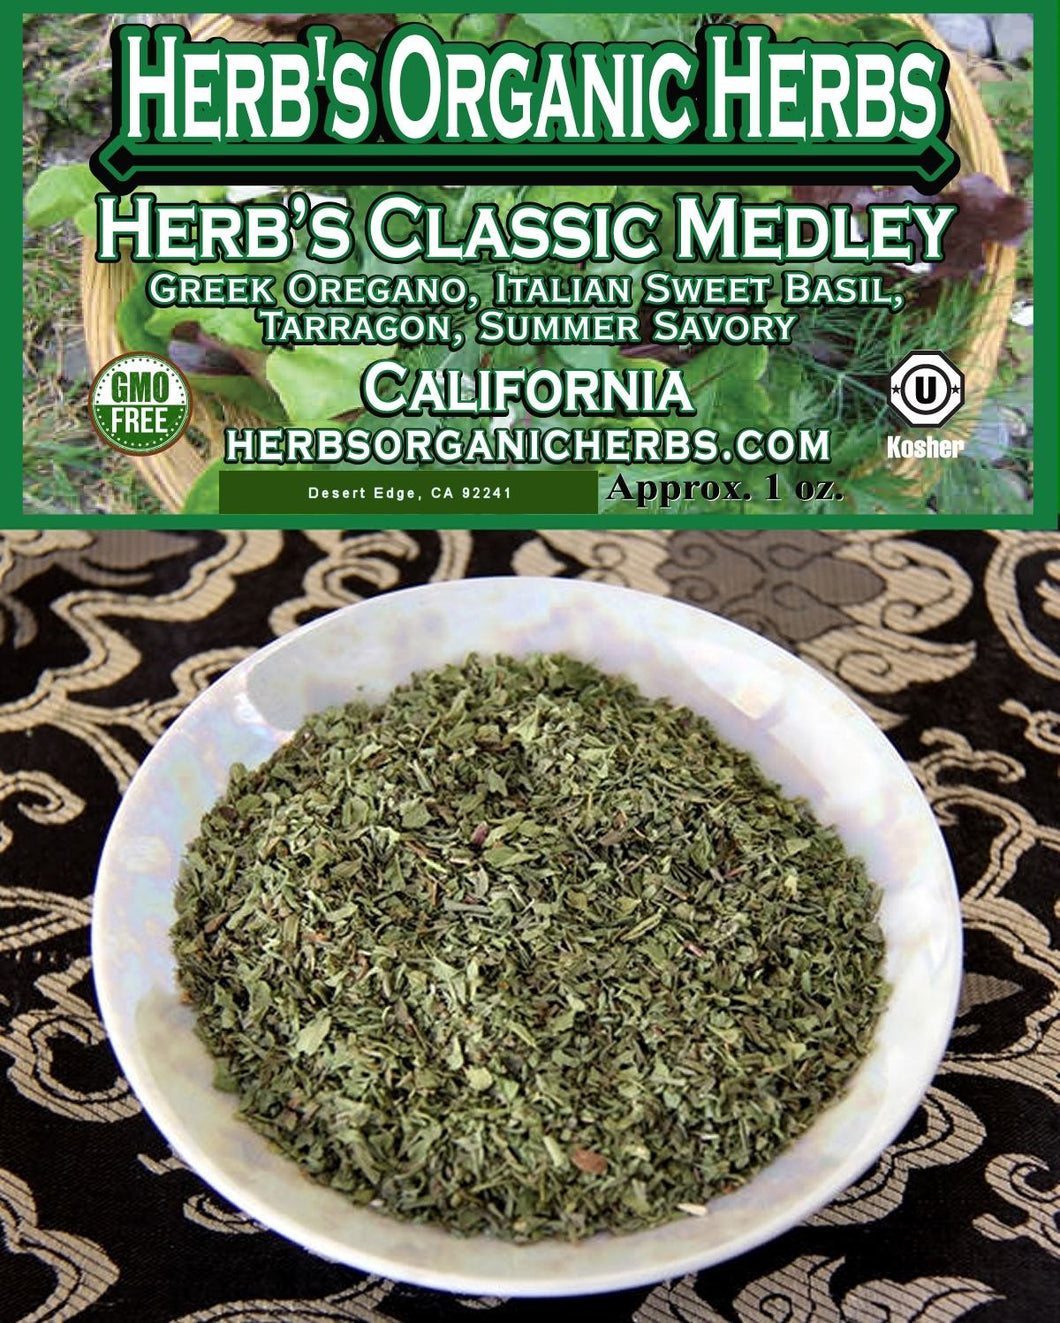 Herb's Classic Medley